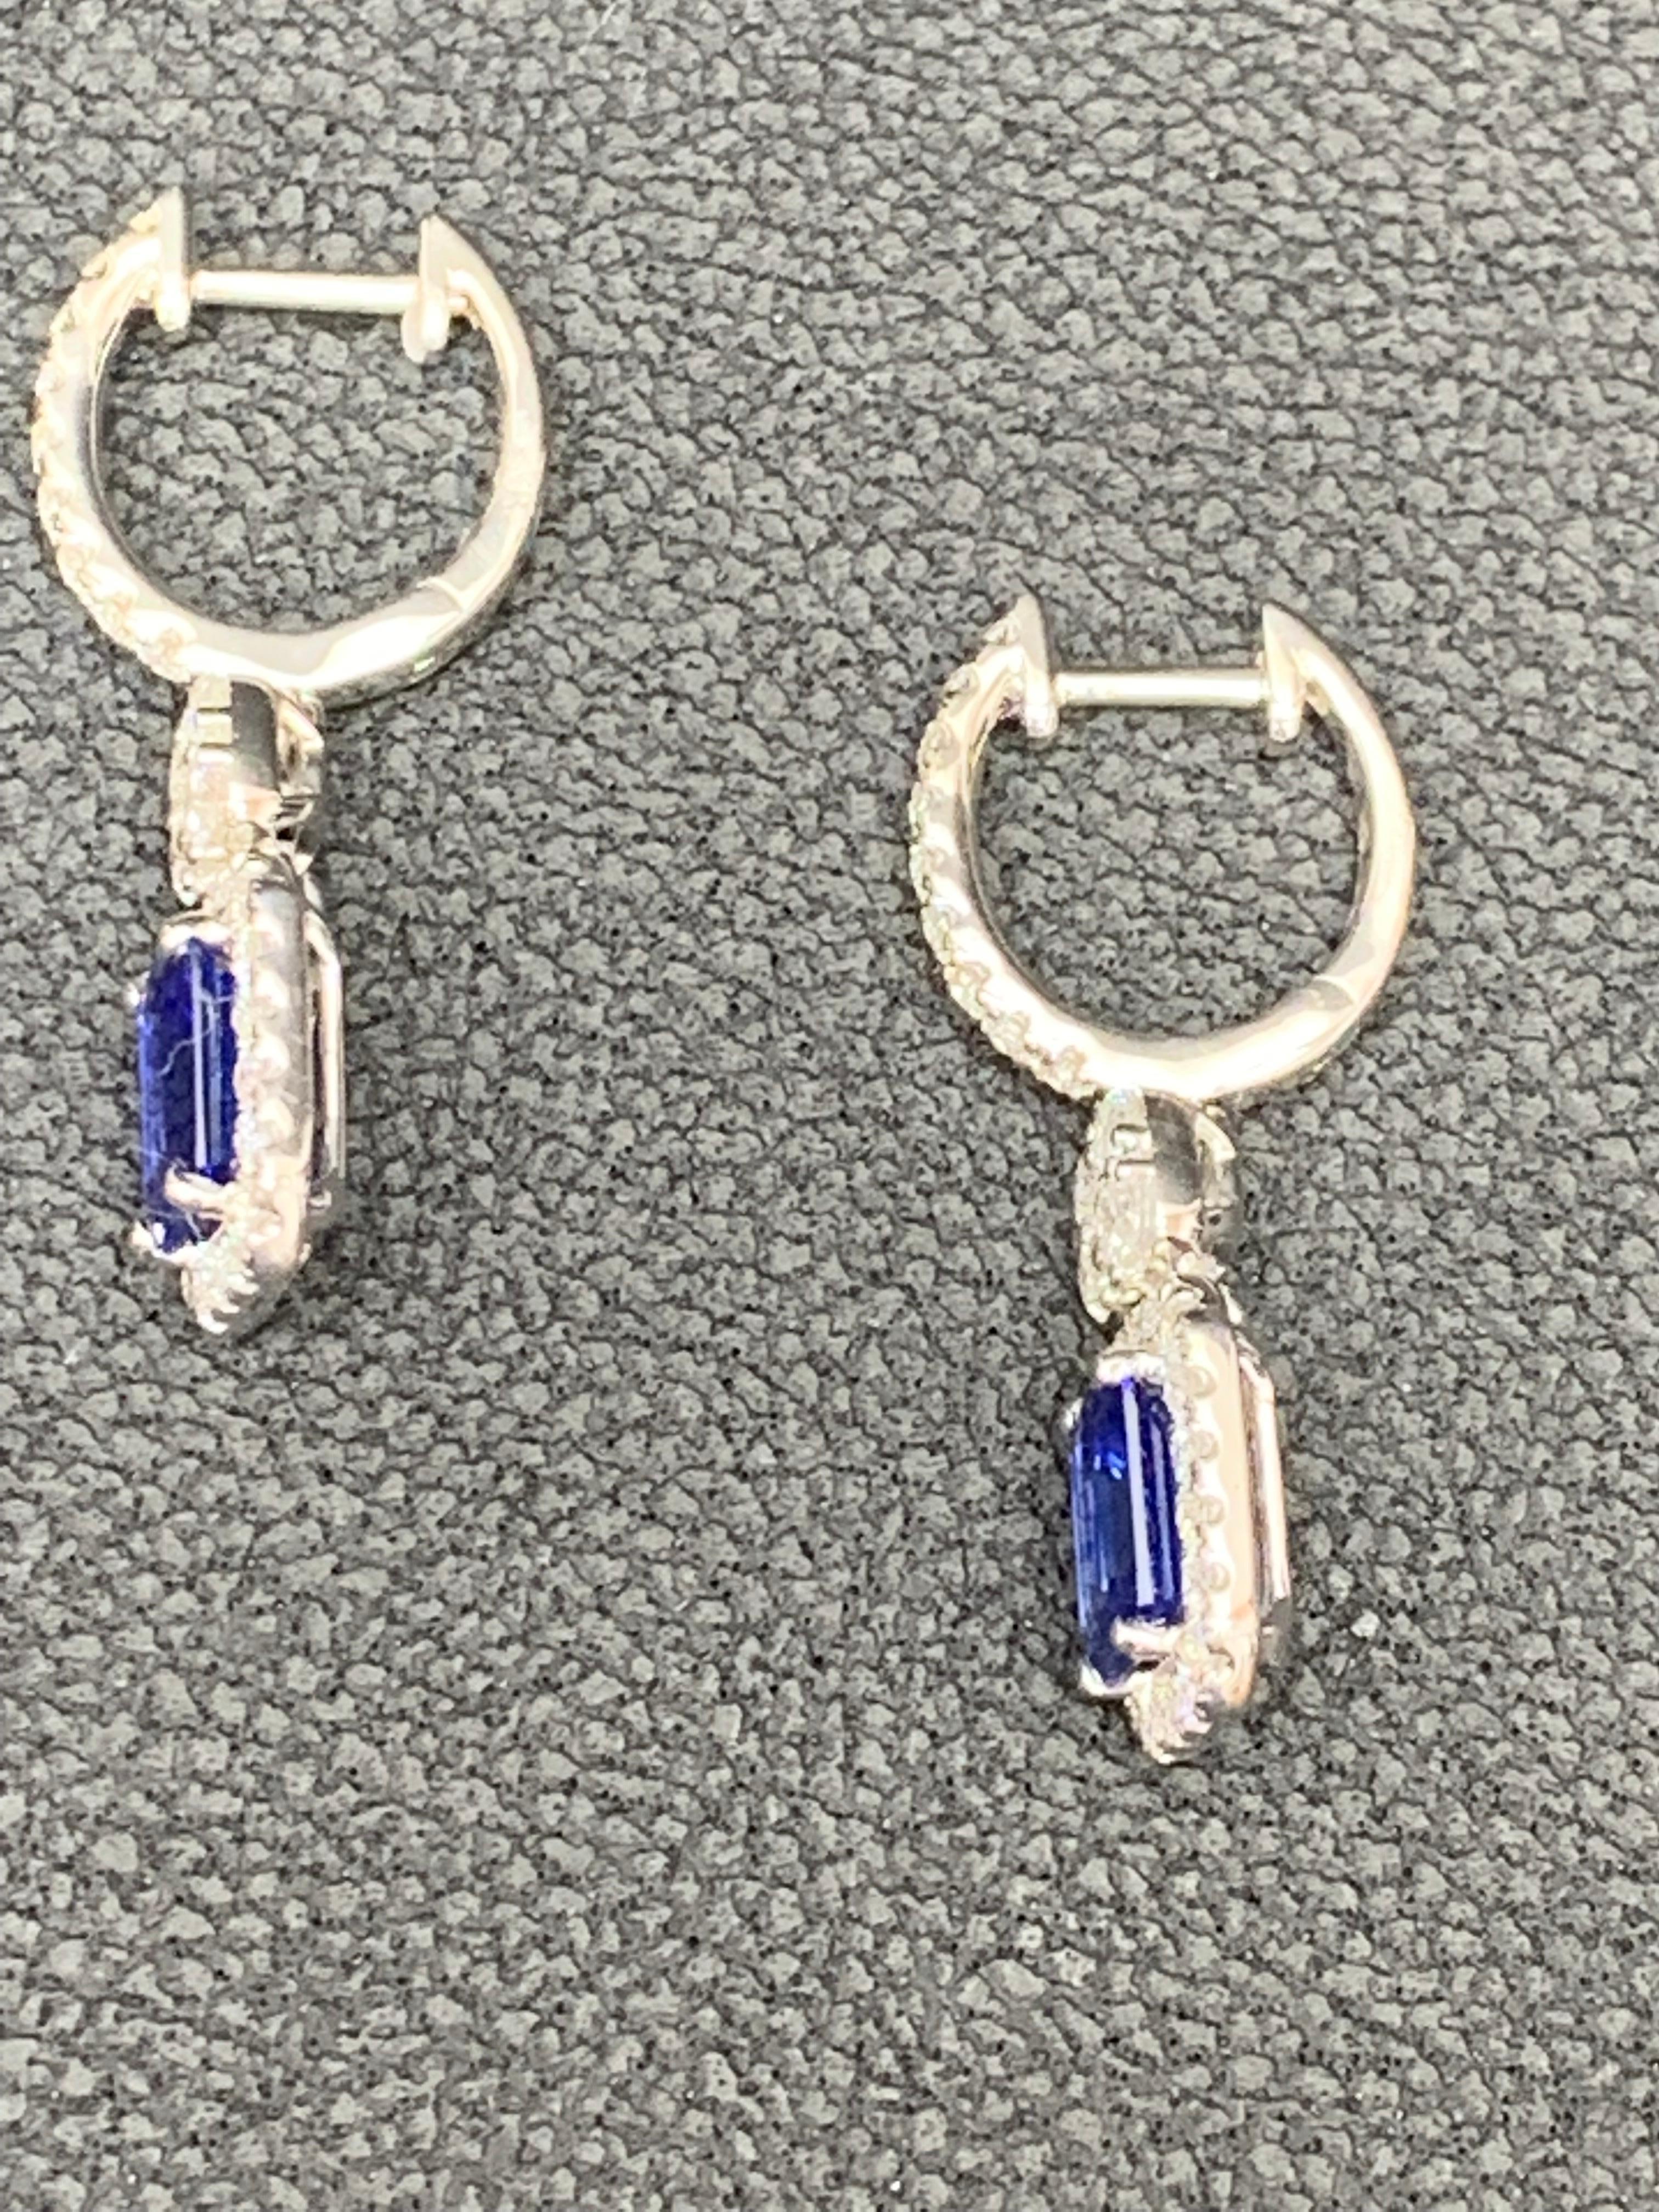 Classic 18k white gold dangle earrings set with 2 emerald cut blue sapphires weighing 1.88 carats total. The emeralds are surrounded by 1 rows of brilliant round diamonds weighing 0.62 carats suspended on an accented lever-back. A must-have piece of